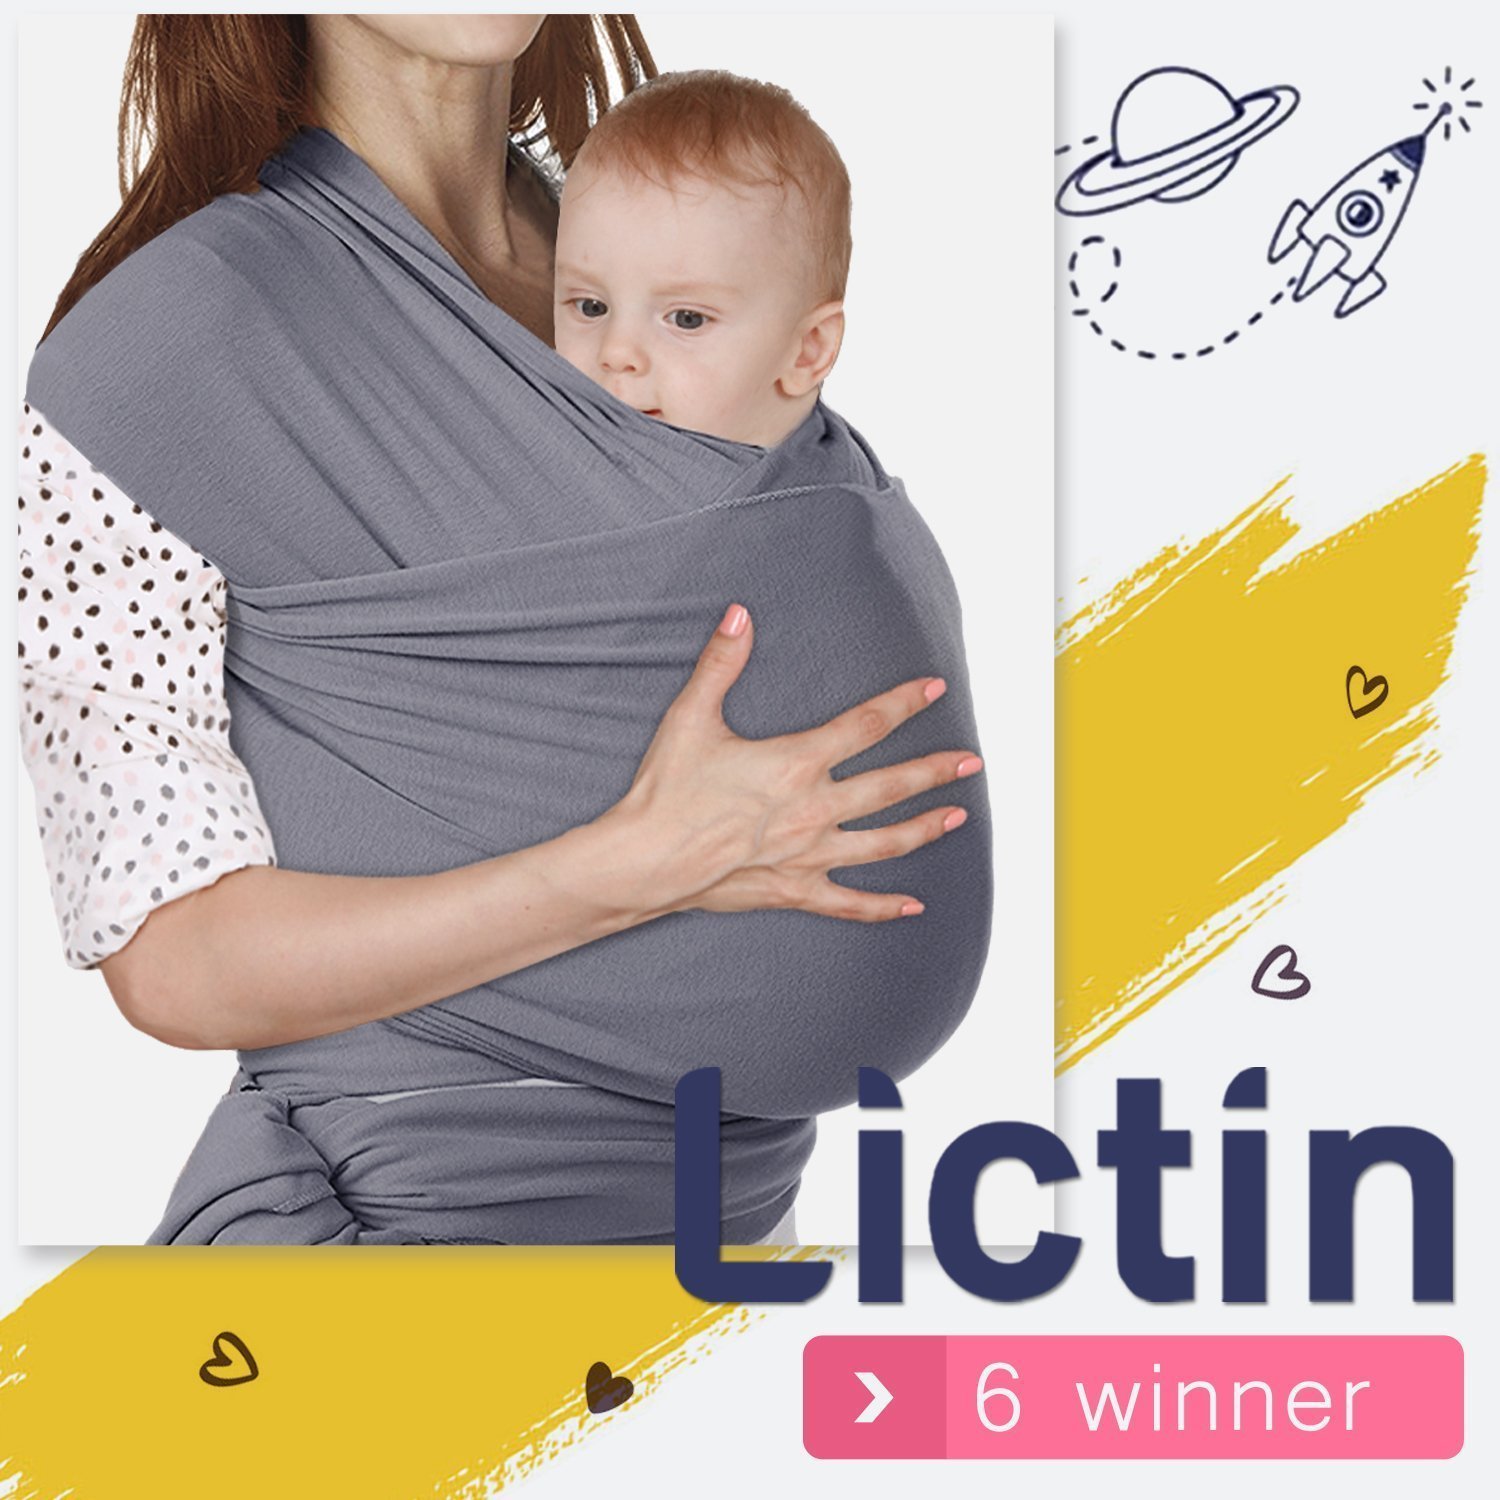 Lictin baby carrier 6 winners Giveaway